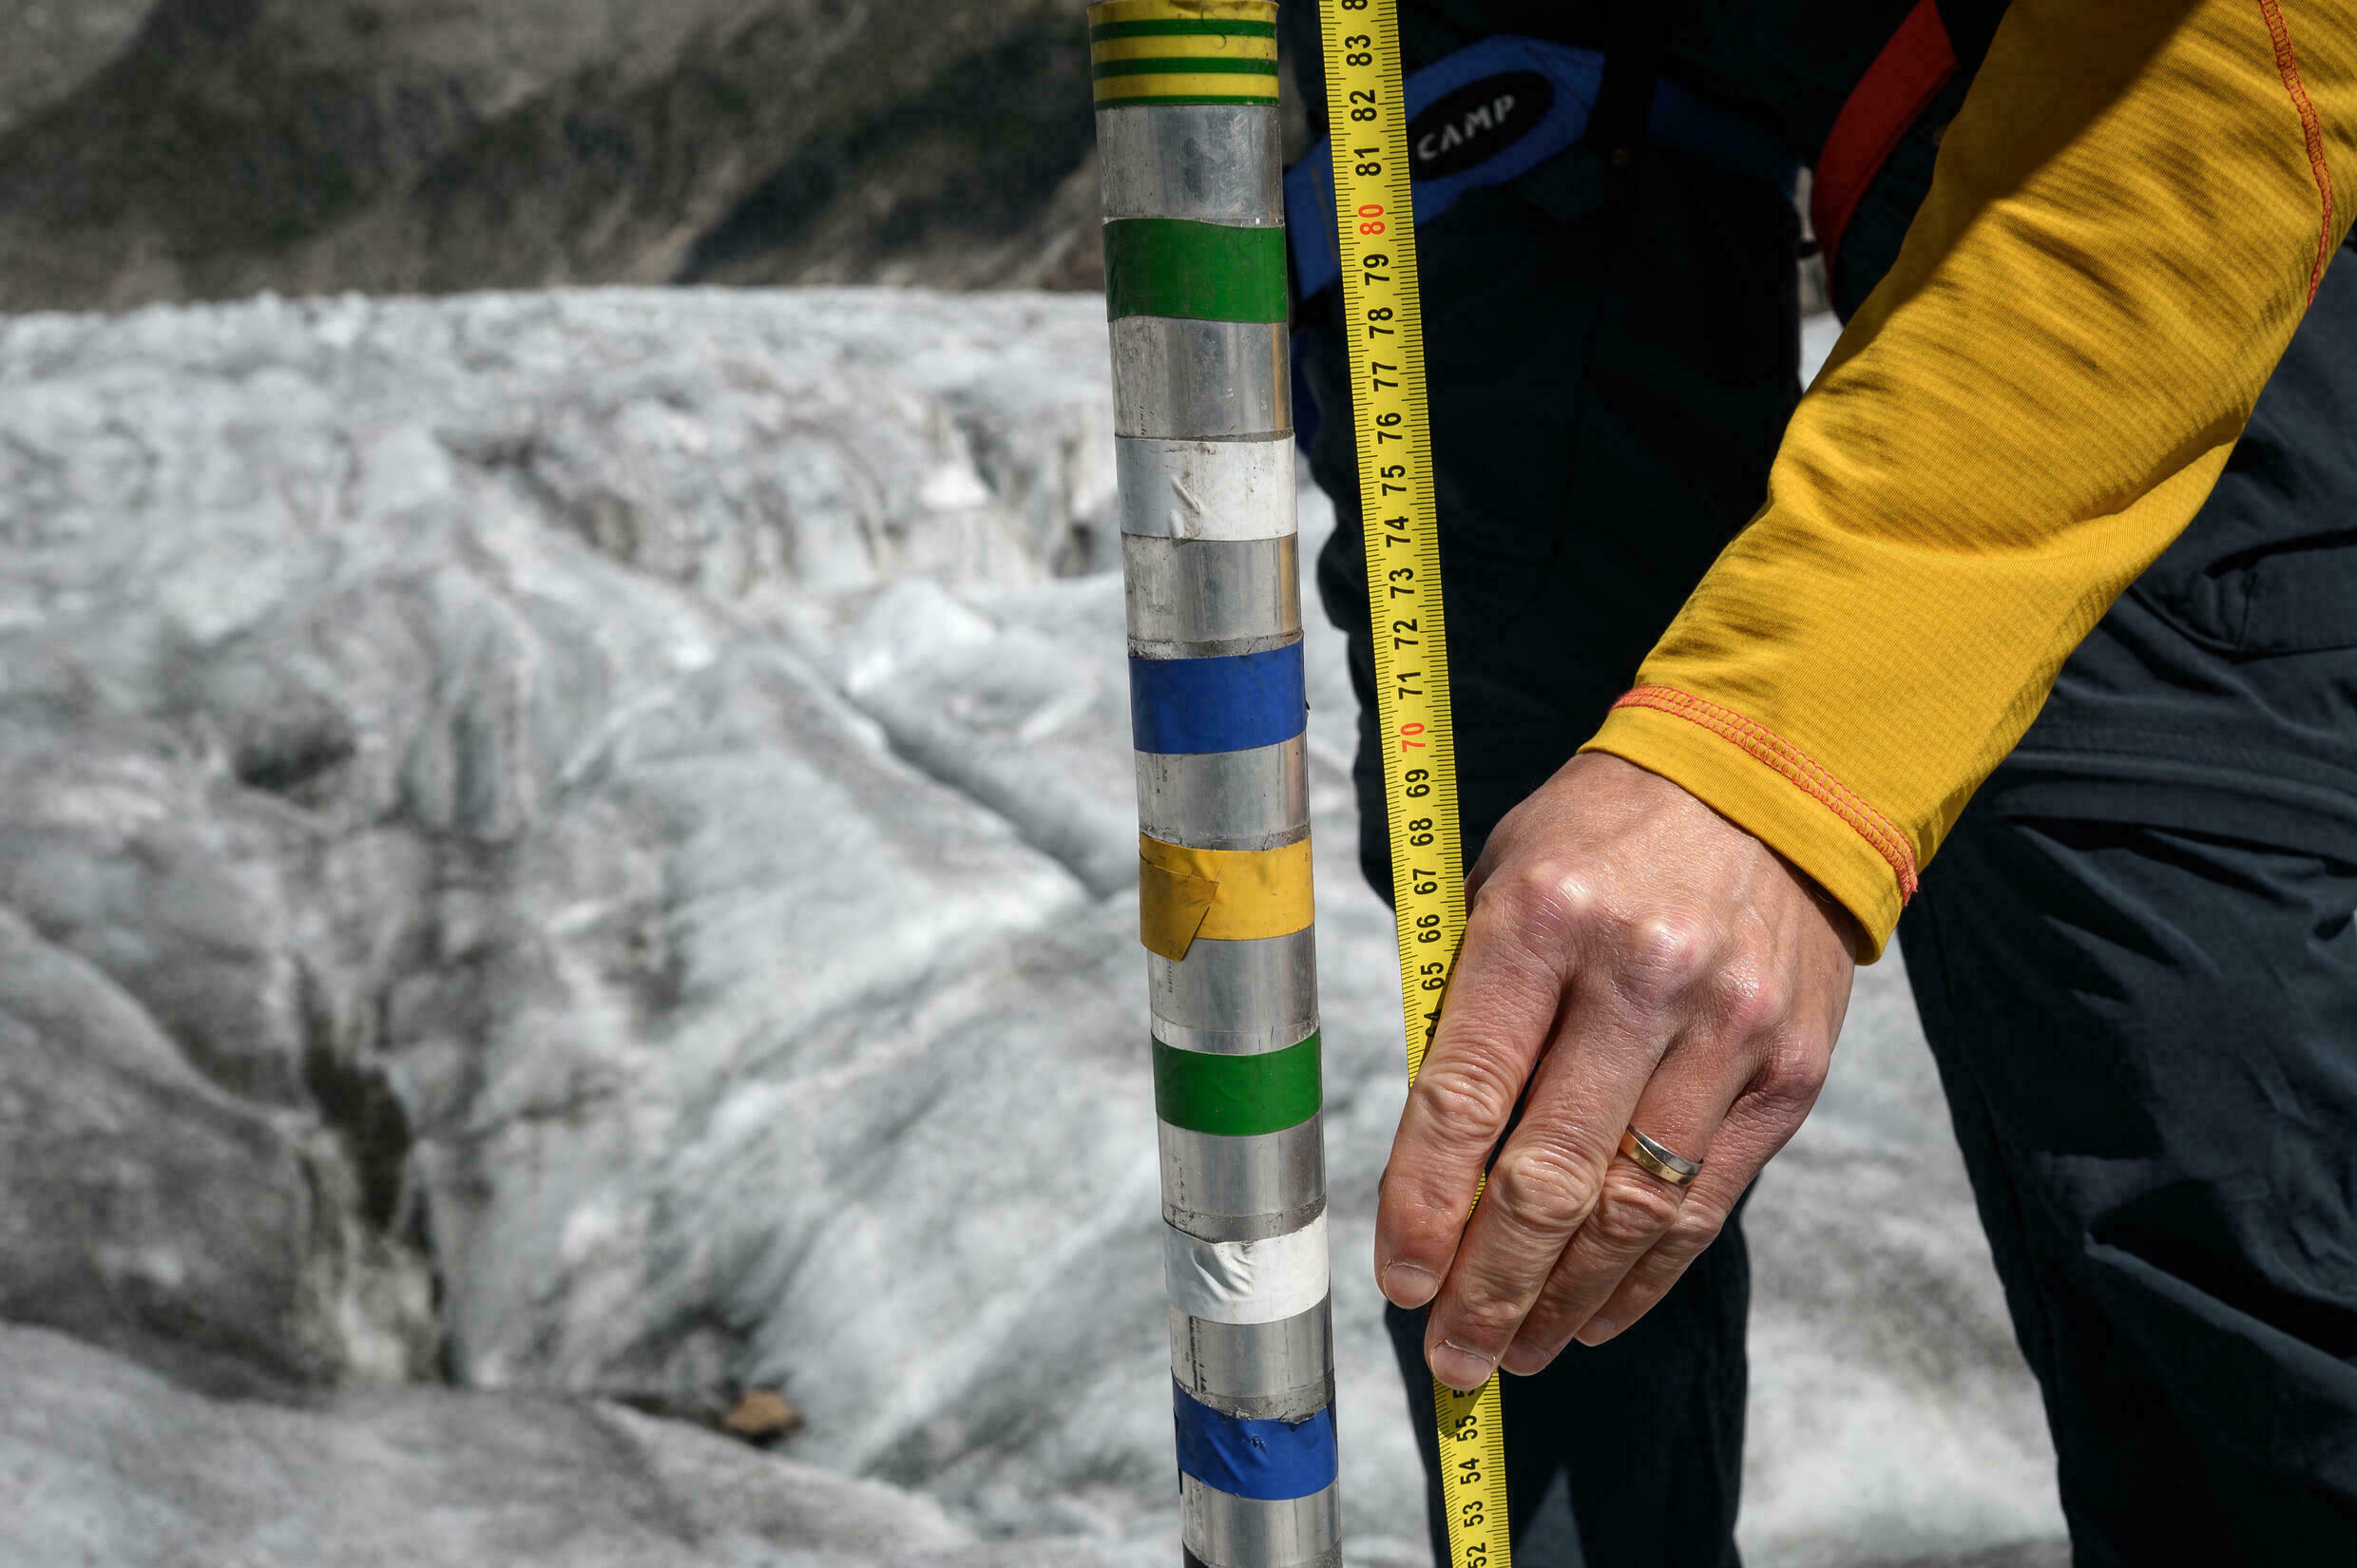 Haas hopes that scientific measurements about the state of glaciers will lead to concrete action